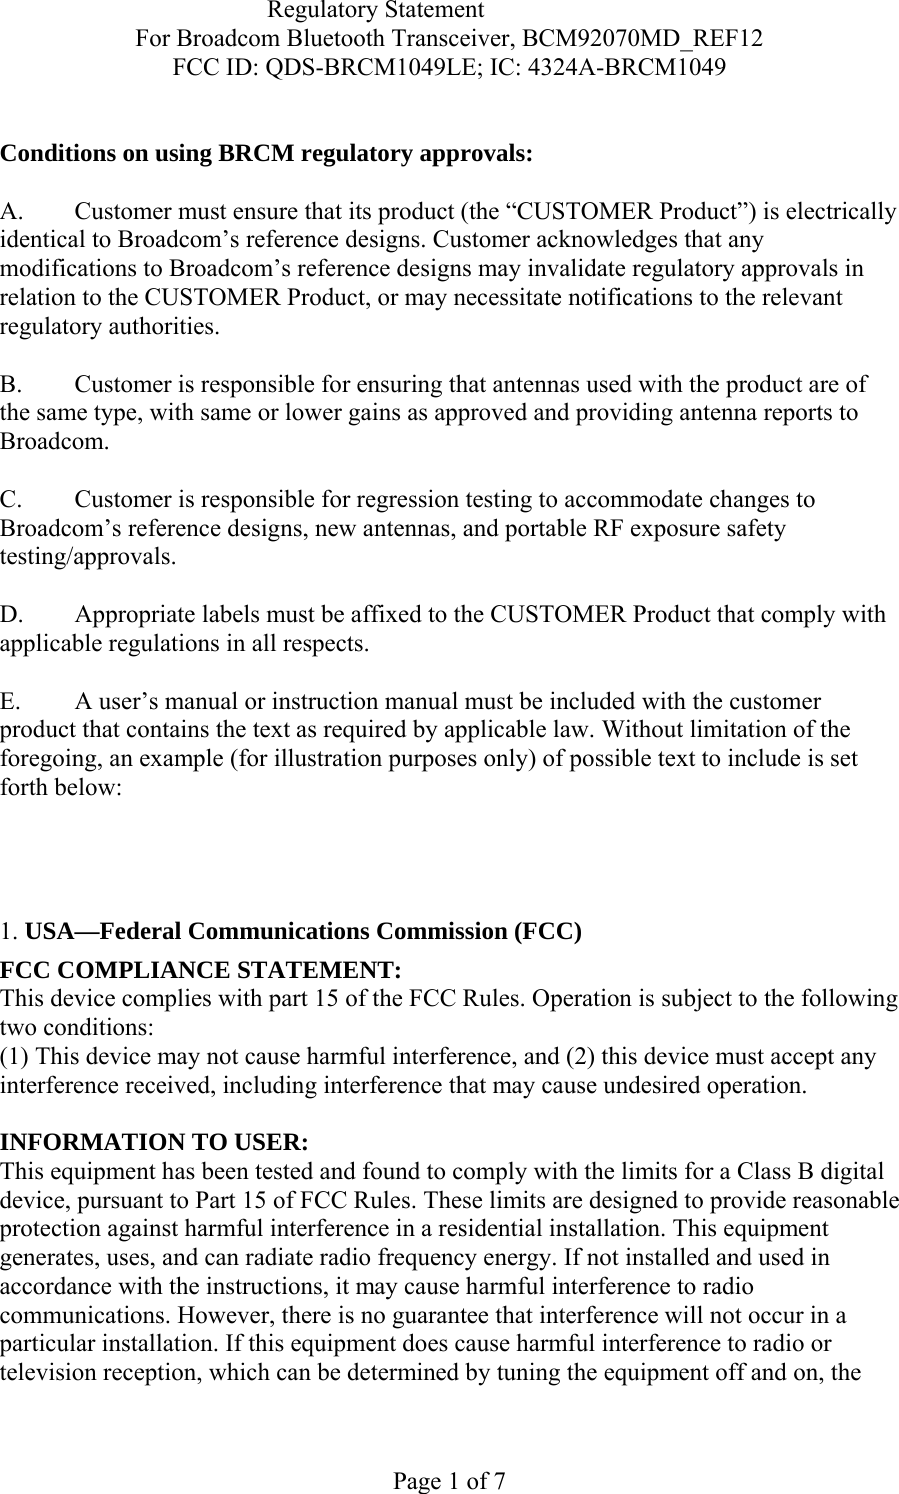                            Regulatory Statement For Broadcom Bluetooth Transceiver, BCM92070MD_REF12 FCC ID: QDS-BRCM1049LE; IC: 4324A-BRCM1049  Page 1 of 7  Conditions on using BRCM regulatory approvals:   A.  Customer must ensure that its product (the “CUSTOMER Product”) is electrically identical to Broadcom’s reference designs. Customer acknowledges that any modifications to Broadcom’s reference designs may invalidate regulatory approvals in relation to the CUSTOMER Product, or may necessitate notifications to the relevant regulatory authorities.  B.   Customer is responsible for ensuring that antennas used with the product are of the same type, with same or lower gains as approved and providing antenna reports to Broadcom.  C.   Customer is responsible for regression testing to accommodate changes to Broadcom’s reference designs, new antennas, and portable RF exposure safety testing/approvals.  D.  Appropriate labels must be affixed to the CUSTOMER Product that comply with applicable regulations in all respects.    E.  A user’s manual or instruction manual must be included with the customer product that contains the text as required by applicable law. Without limitation of the foregoing, an example (for illustration purposes only) of possible text to include is set forth below:      1. USA—Federal Communications Commission (FCC) FCC COMPLIANCE STATEMENT: This device complies with part 15 of the FCC Rules. Operation is subject to the following two conditions: (1) This device may not cause harmful interference, and (2) this device must accept any interference received, including interference that may cause undesired operation.  INFORMATION TO USER: This equipment has been tested and found to comply with the limits for a Class B digital device, pursuant to Part 15 of FCC Rules. These limits are designed to provide reasonable protection against harmful interference in a residential installation. This equipment generates, uses, and can radiate radio frequency energy. If not installed and used in accordance with the instructions, it may cause harmful interference to radio communications. However, there is no guarantee that interference will not occur in a particular installation. If this equipment does cause harmful interference to radio or television reception, which can be determined by tuning the equipment off and on, the 